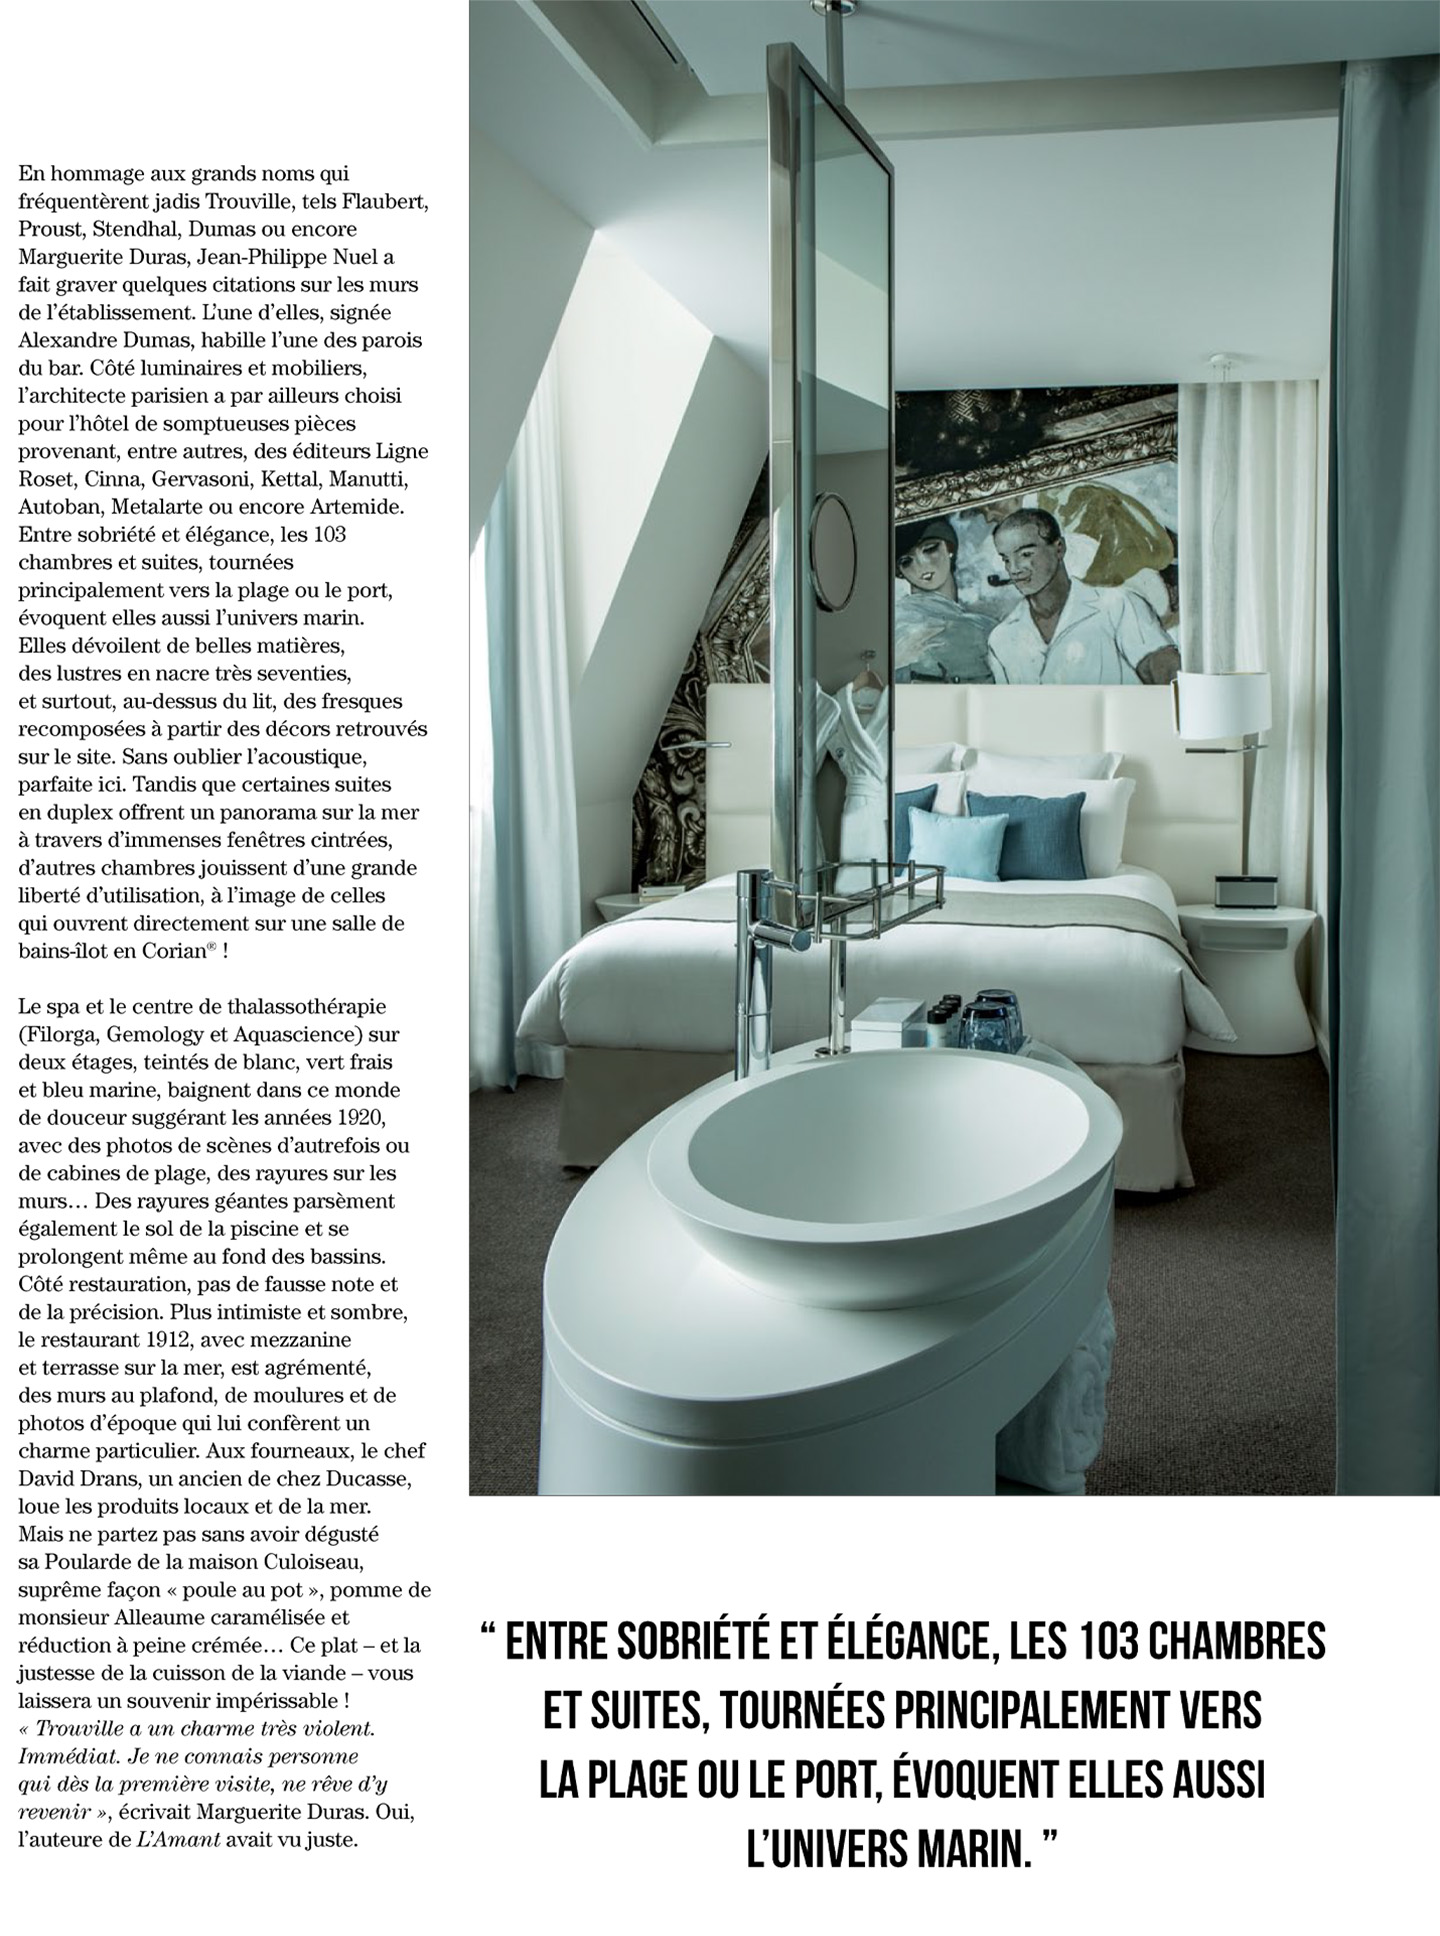 article on the marine cures in trouville designed by the interior design studio jean-philippe nuel in the magazine artravel, 5 star hotel and spa